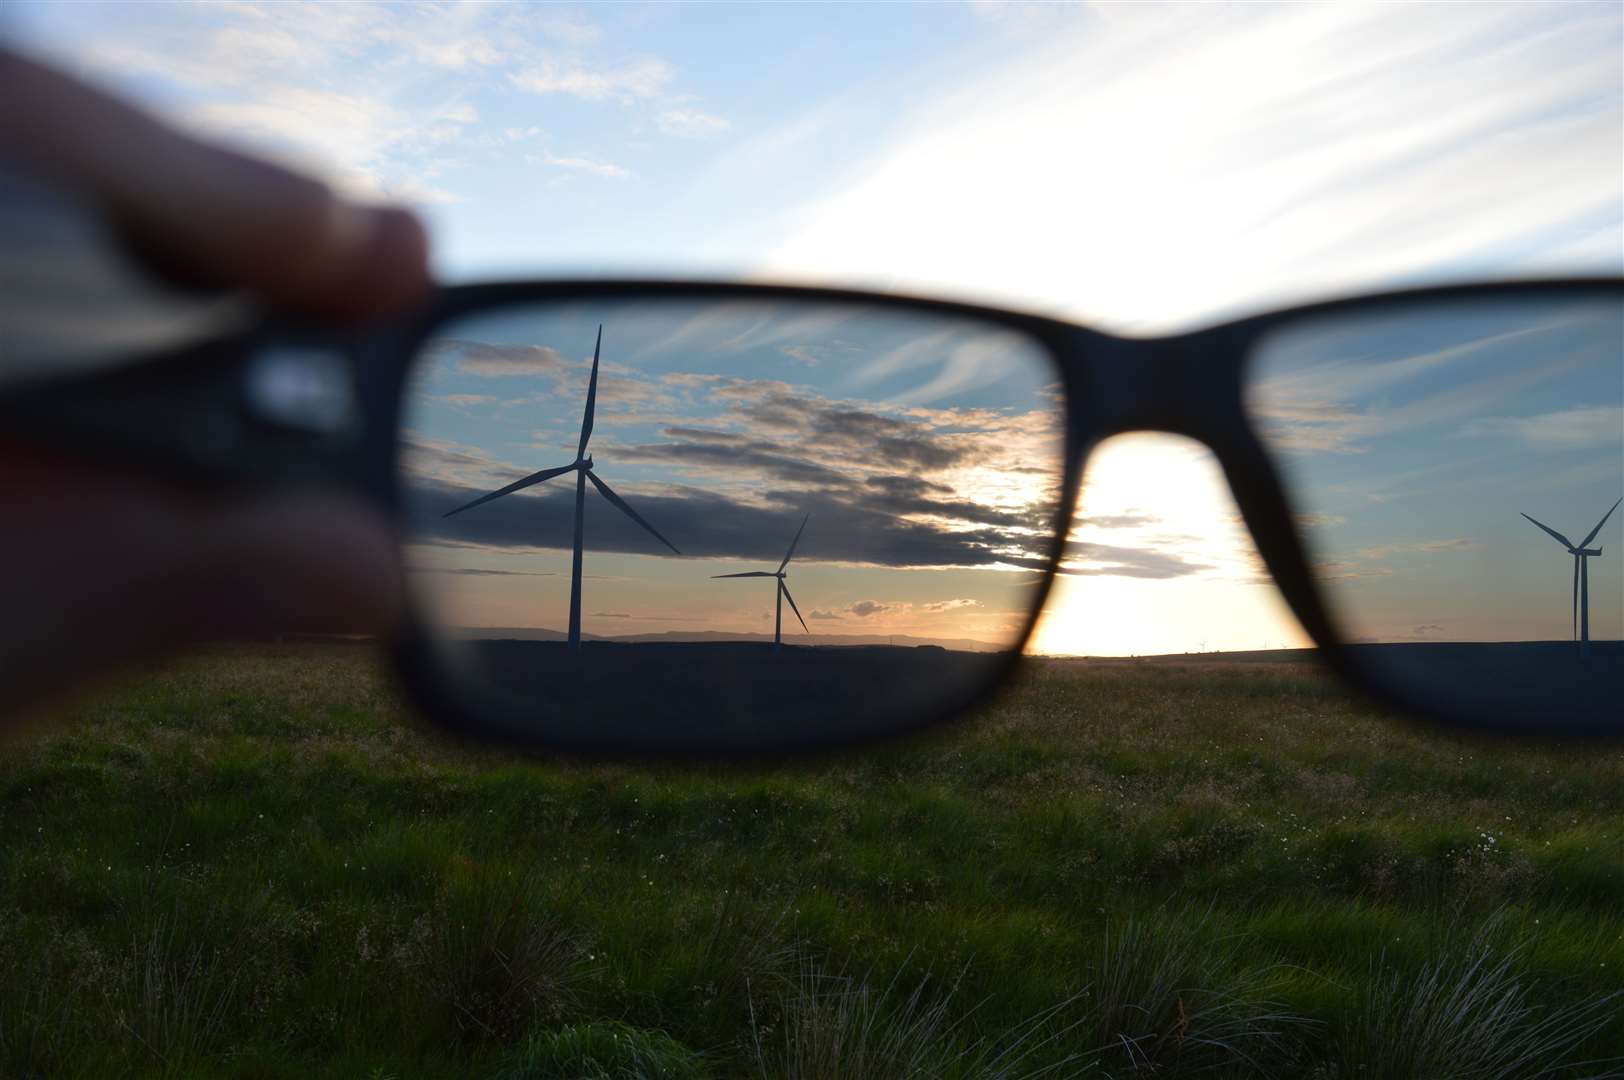 Student Iain Gallacher (22) took this picture of Whitelee Wind Farm near Glasgow.